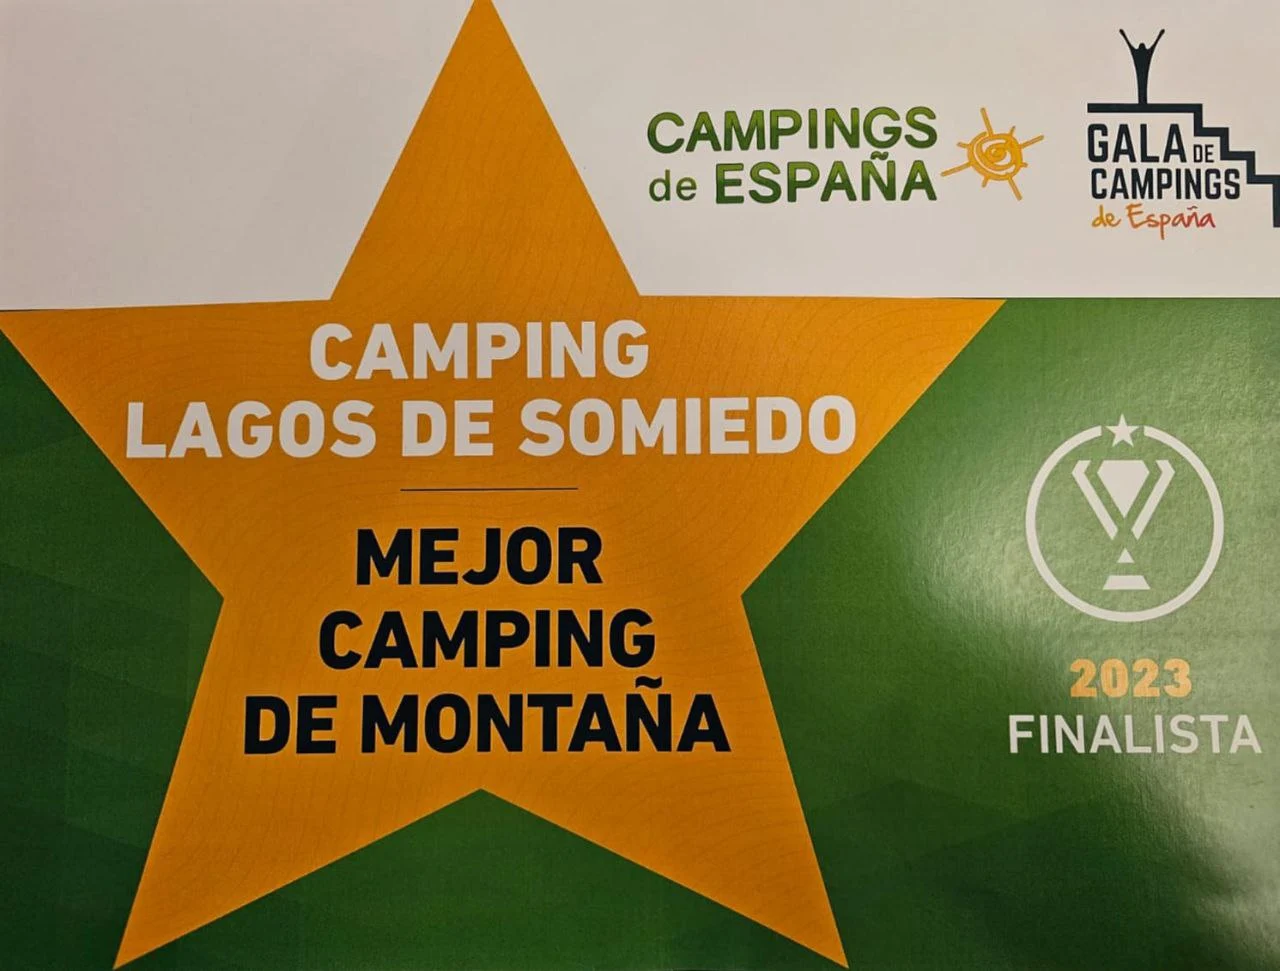 Best Mountain Camping Site in Spain 2023